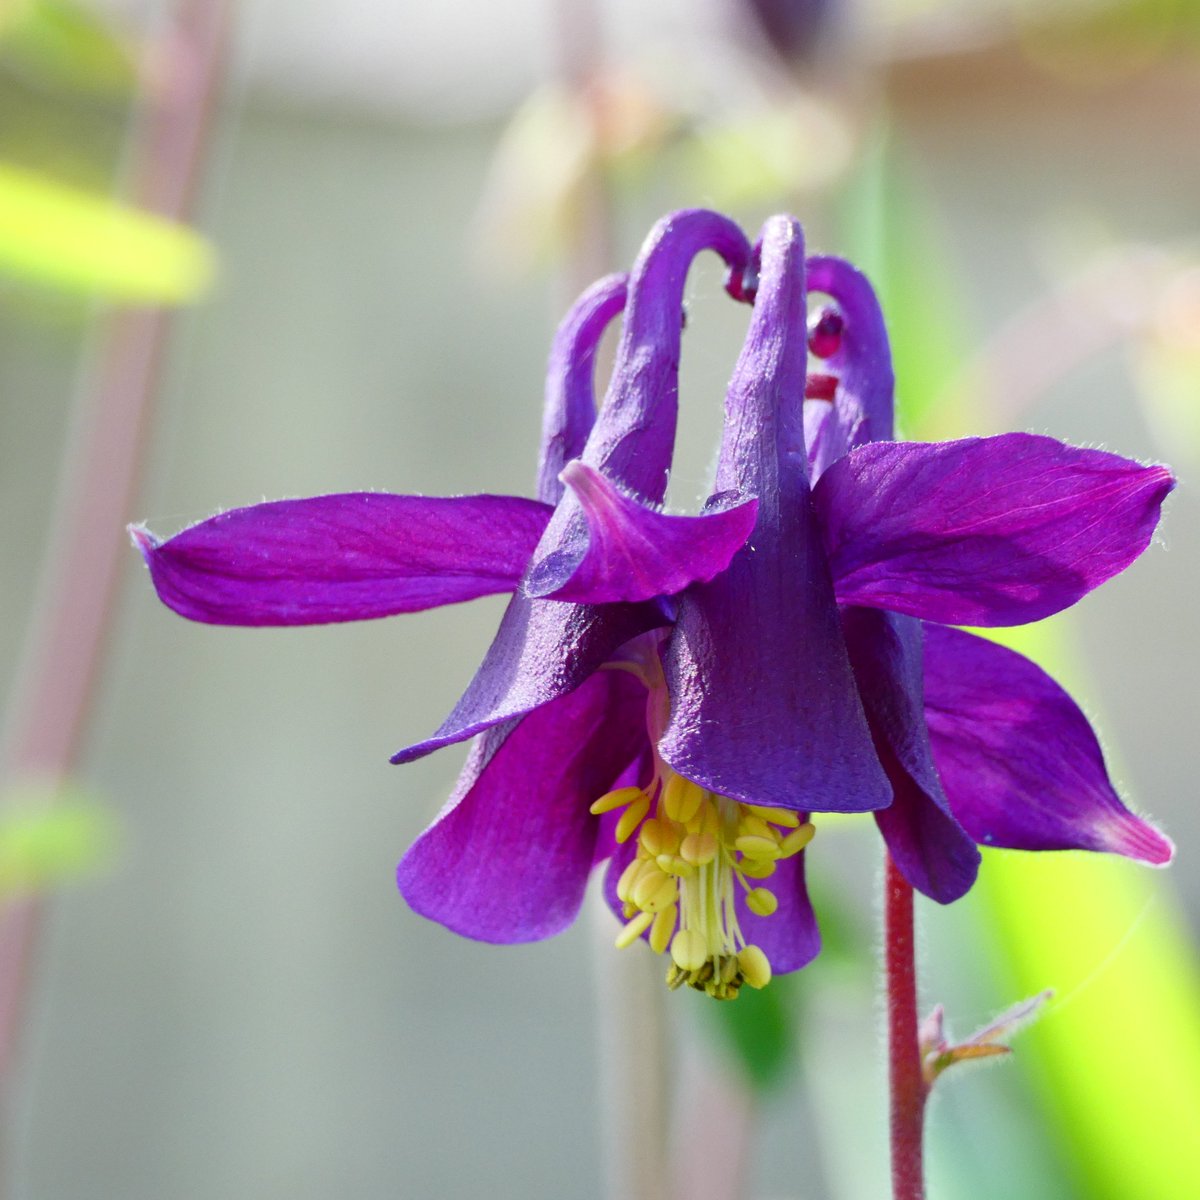 A little #flower, Stirs my heart unwittingly. In its presence, #Beauty finds its way to be. 🌸 #NaturePhotography #NaturePhoto #naturesbeauty #NaturesArt #flowers #flora #FlowerPhotography #FlowerOfTheDay #aquilegia #columbine #photography #植物 #自然 #花 #開花 #風景 #オダマキ